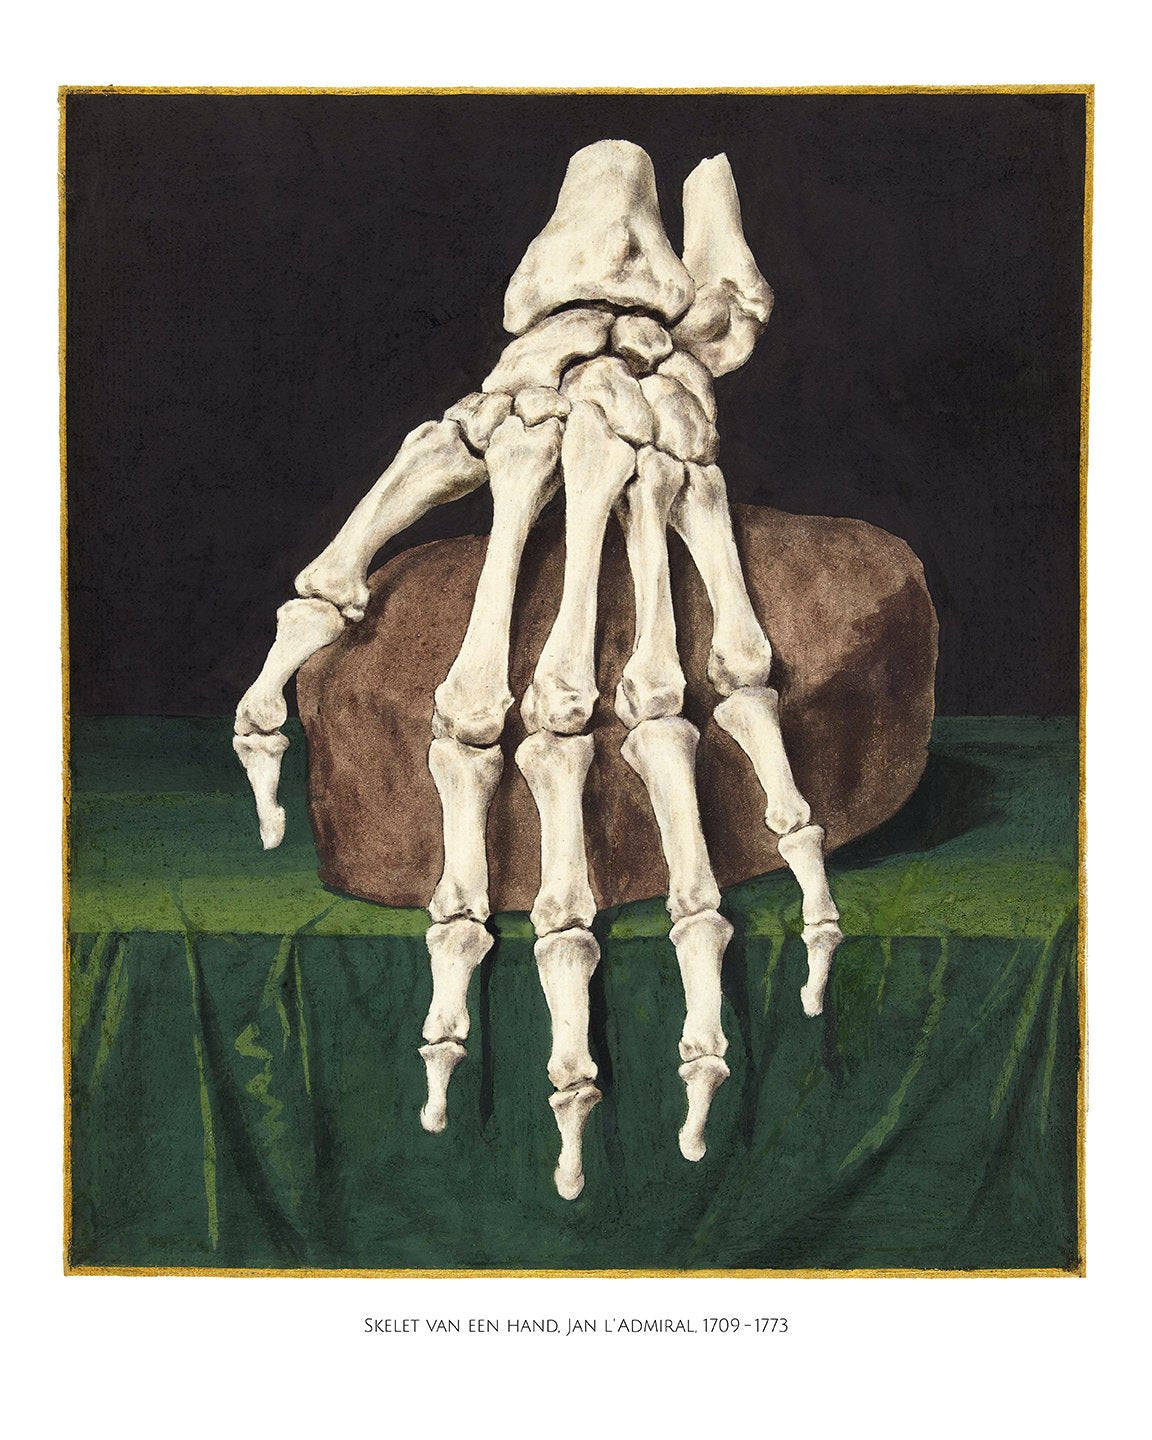 Skeleton of a Hand Anatomical Poster